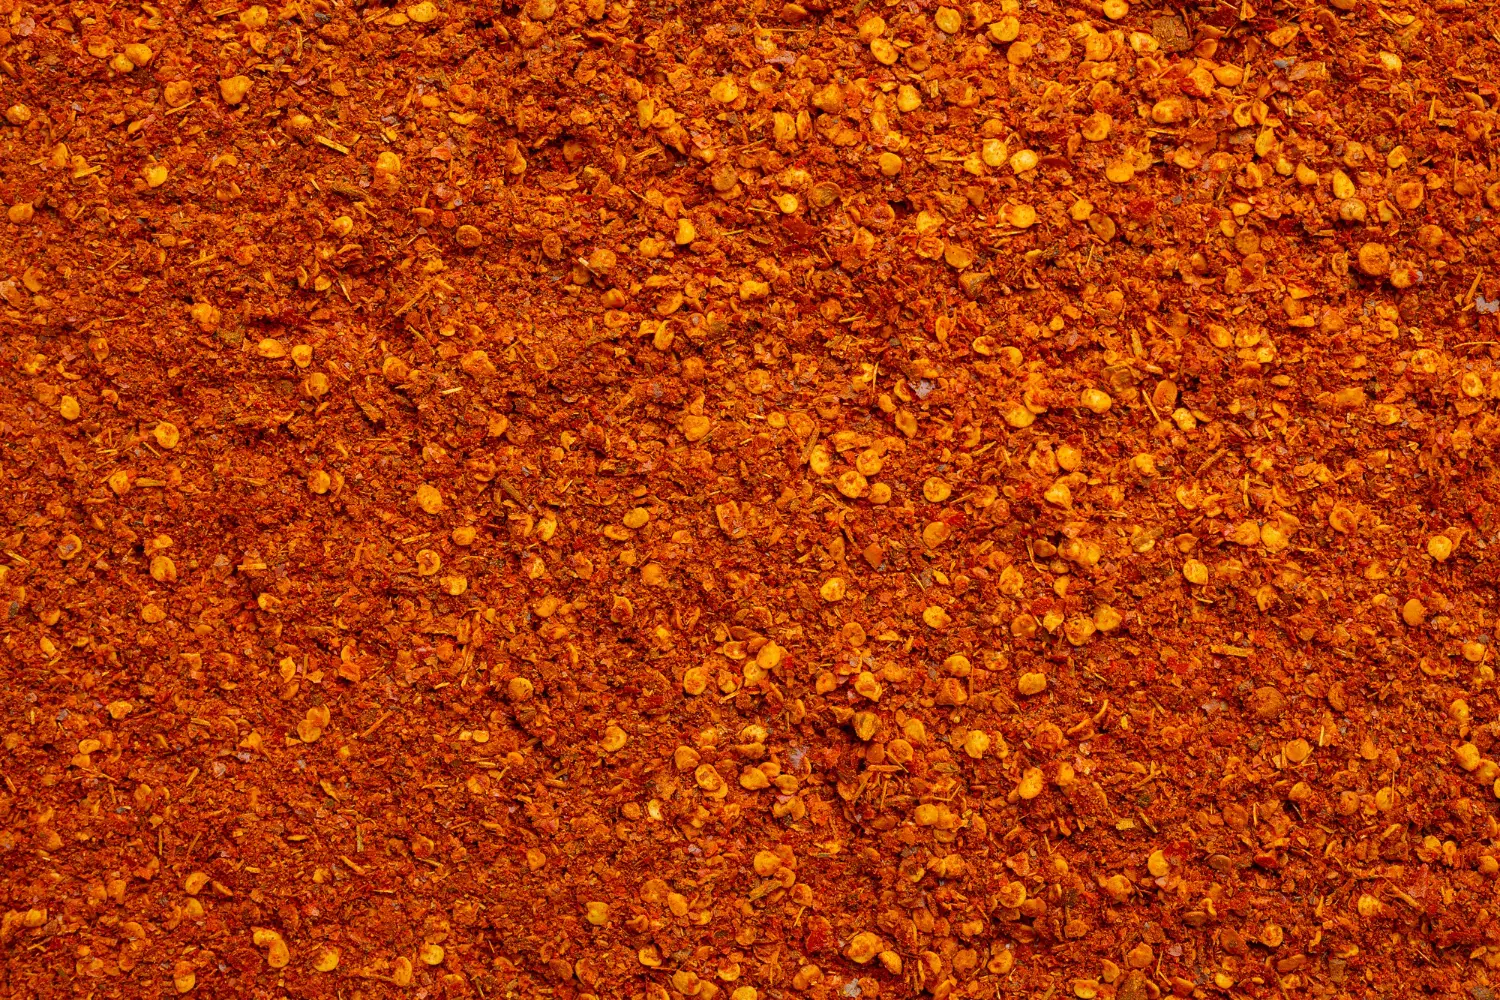 Full-frame image of coarse ground chorizo seasoning, with its vivid red color and speckled appearance.